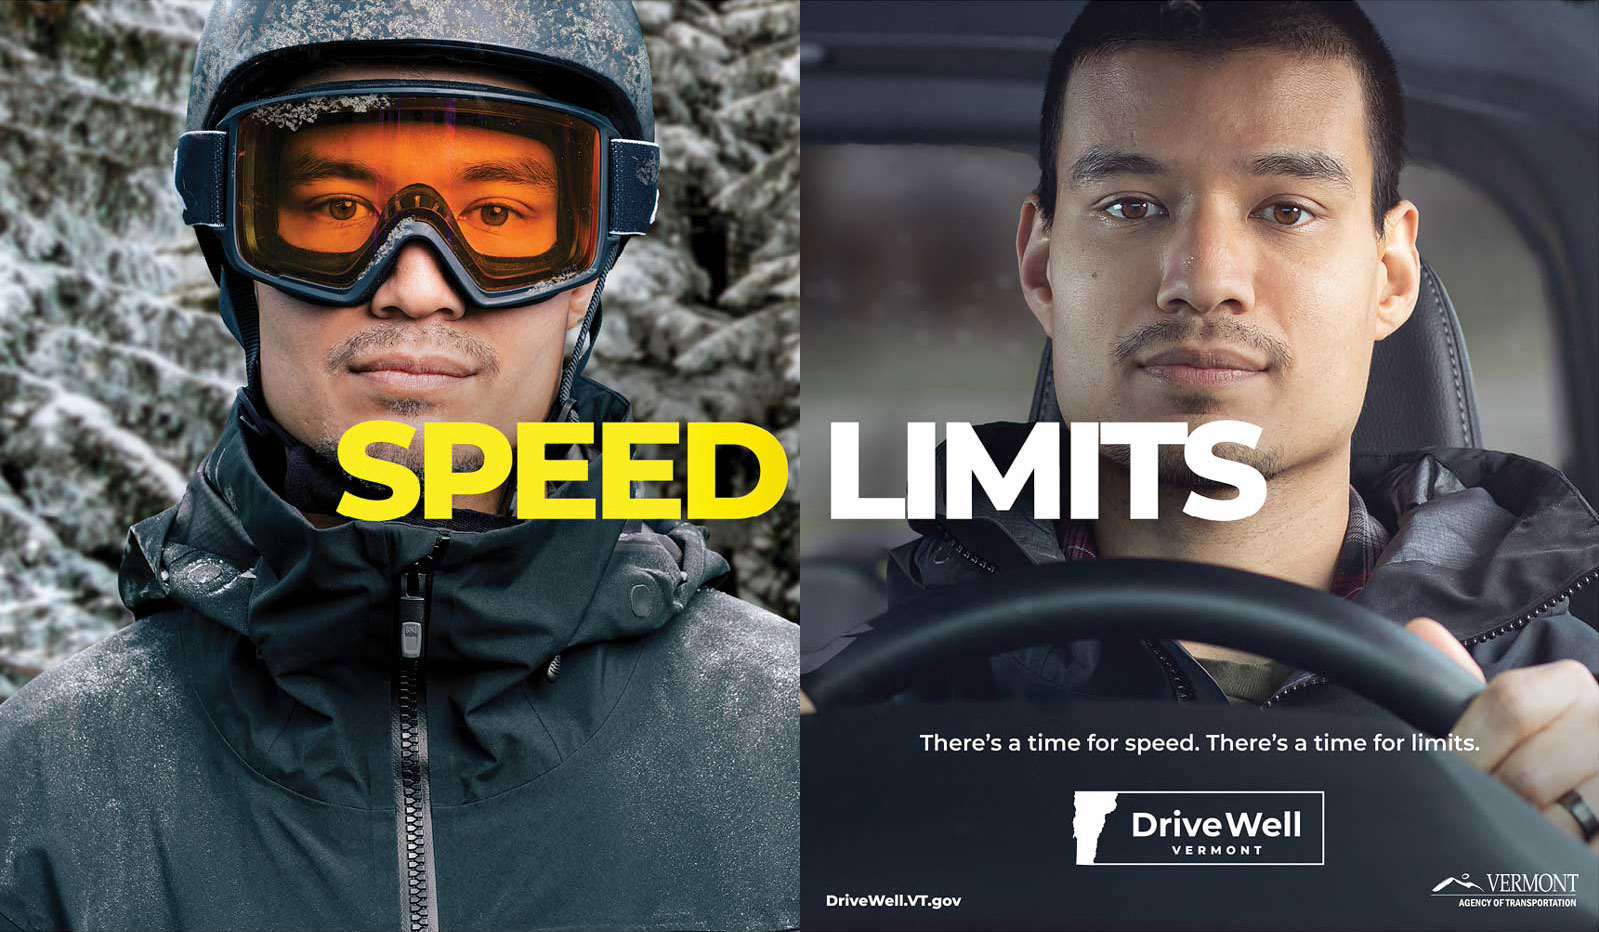 Drivewell - Speed limits